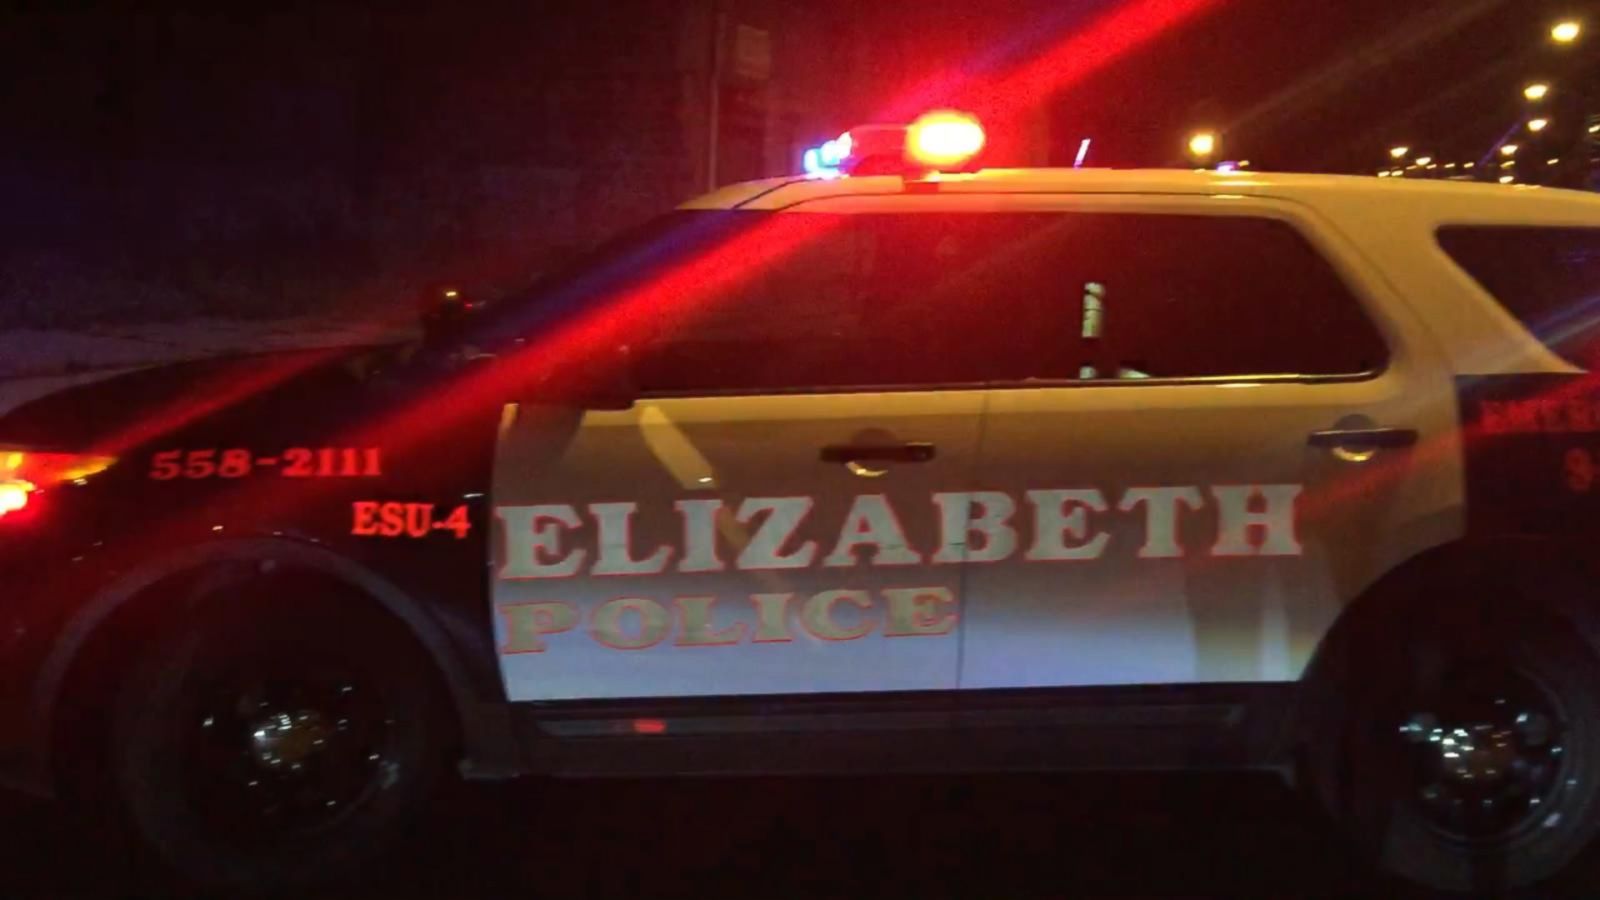 VIDEO: Possible Explosive Device Recovered From Garbage in Elizabeth, New Jersey